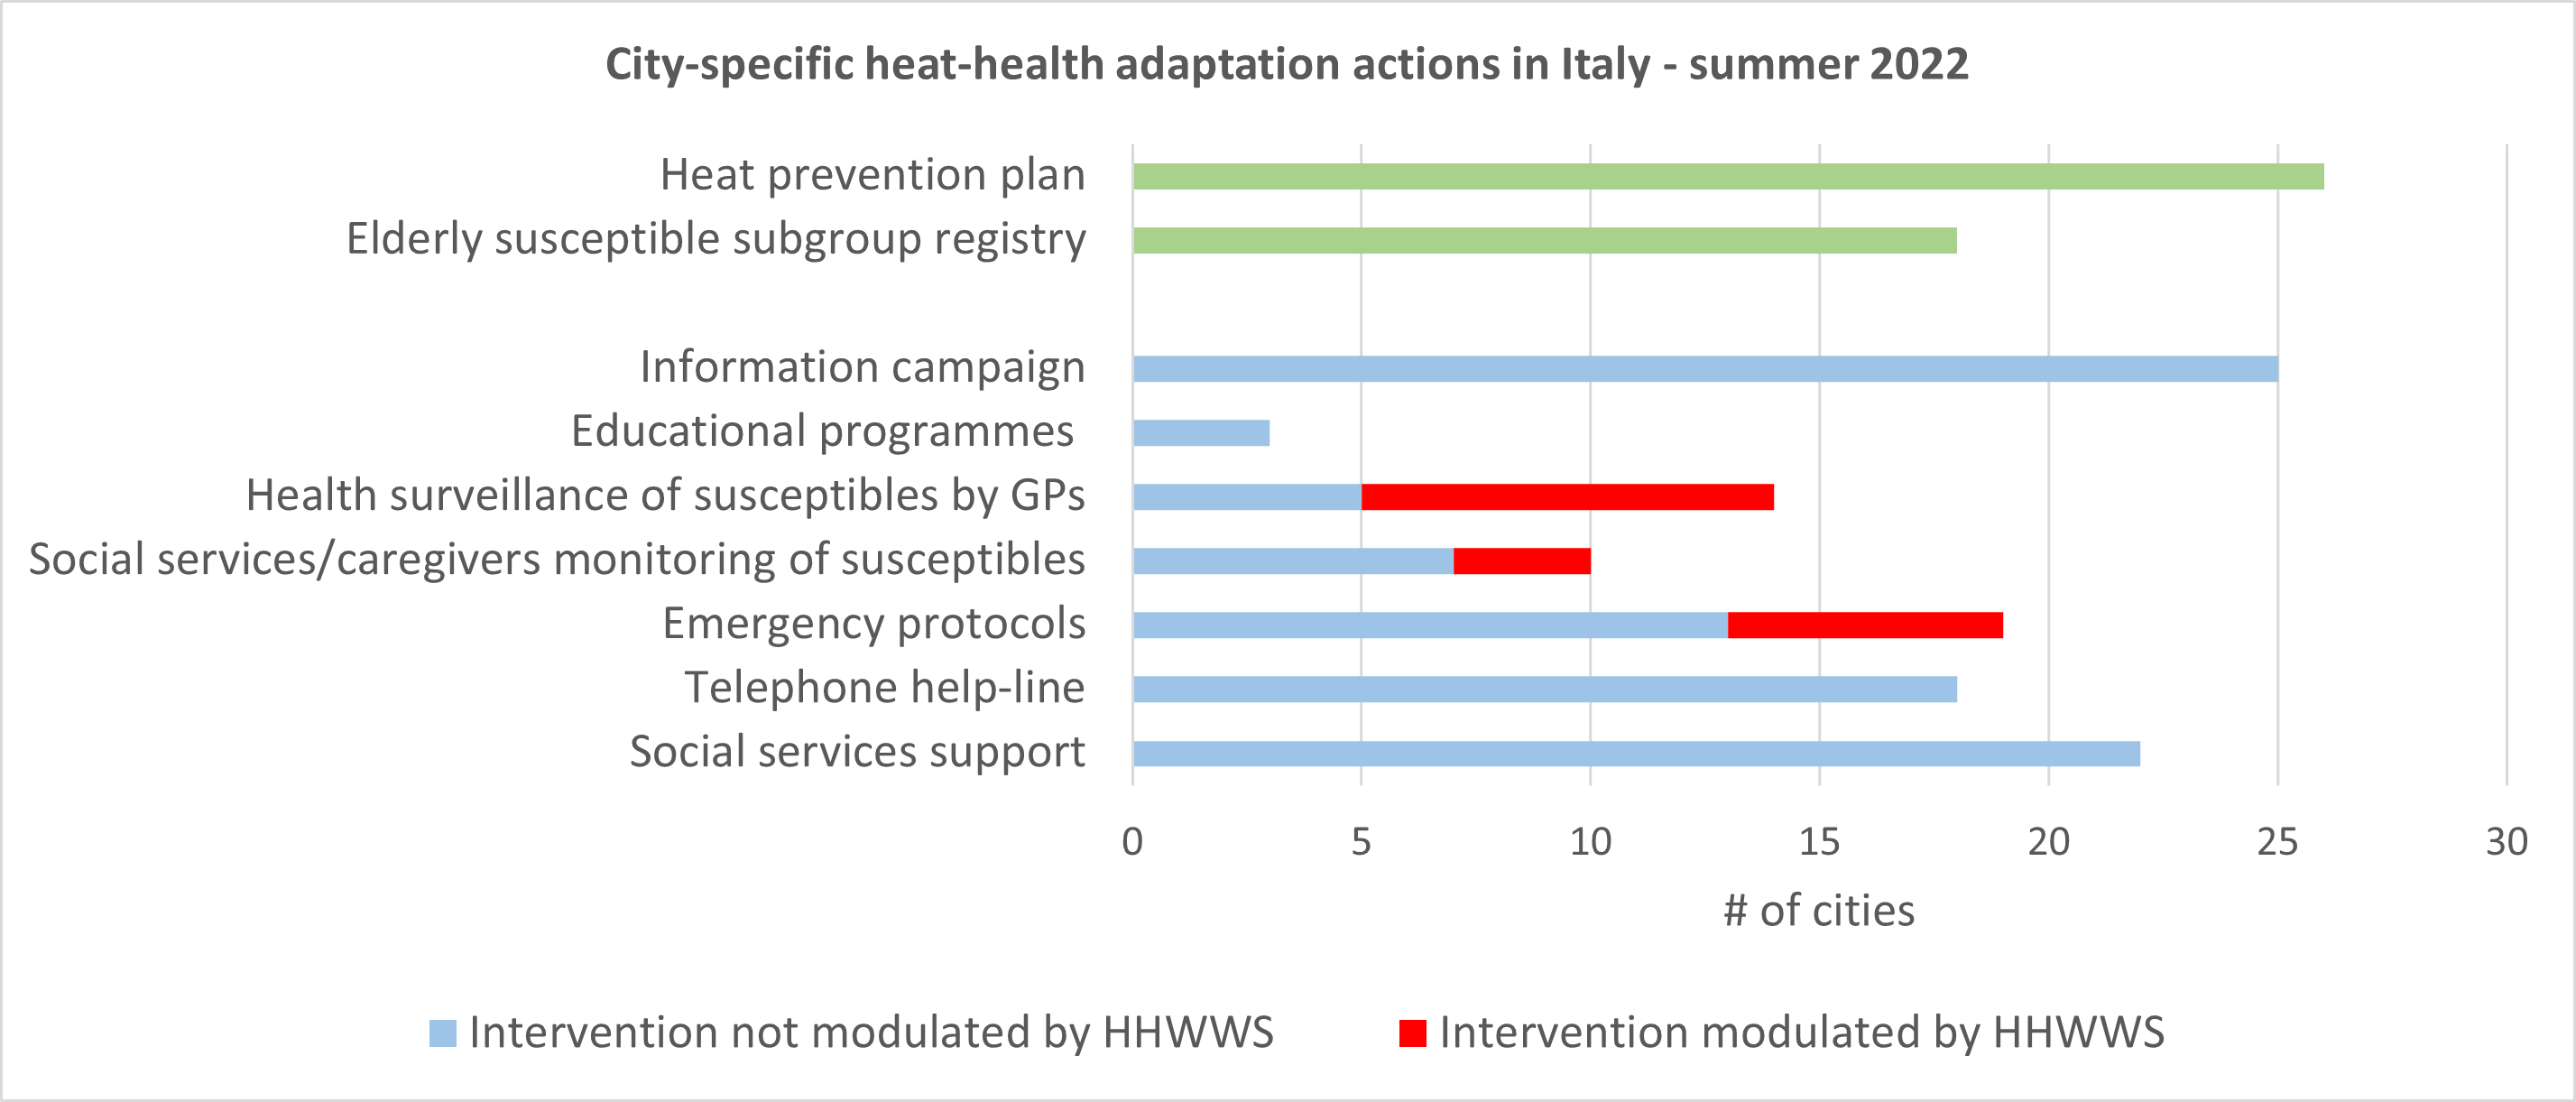 The figure depicts a graph of actions that have been implemented in Italy to raise awareness of the dangers of heat waves and protect vulnerable groups. 